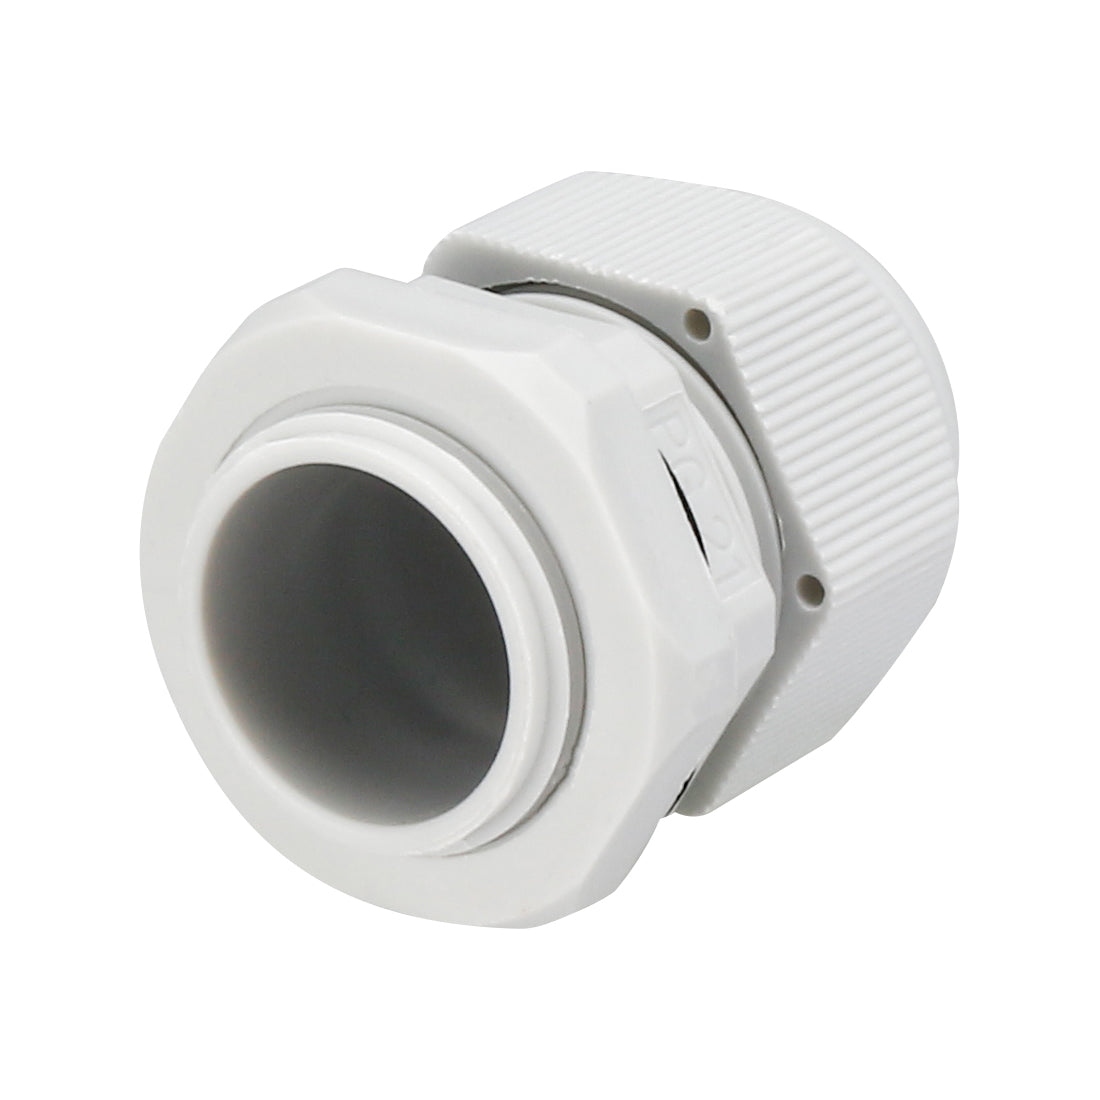 uxcell Uxcell 5Pcs PG21 Cable Gland Waterproof Plastic Joint Adjustable Locknut White for 13mm-16mm Dia Cable Wire